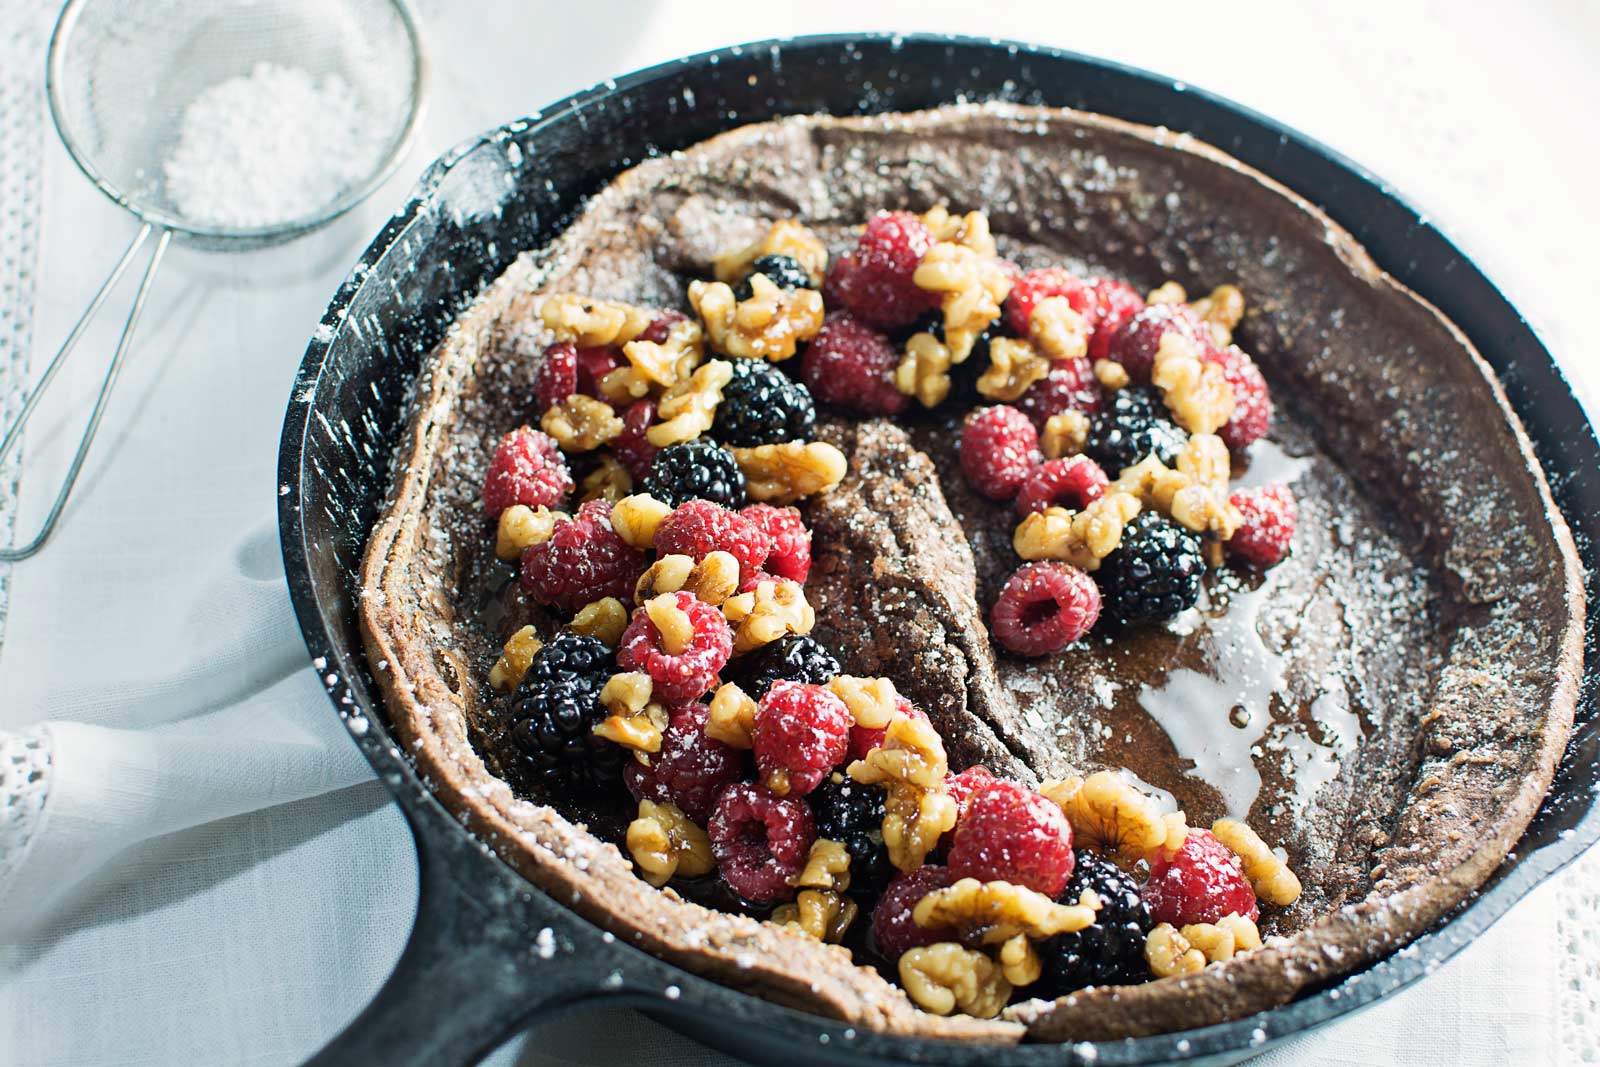 Enjoy a decadent breakfast or dessert with this Chocolate Dutch Baby served with fresh fruit and drizzles of warmed maple syrup and toasted walnuts! Recipe @LittleFiggyFood